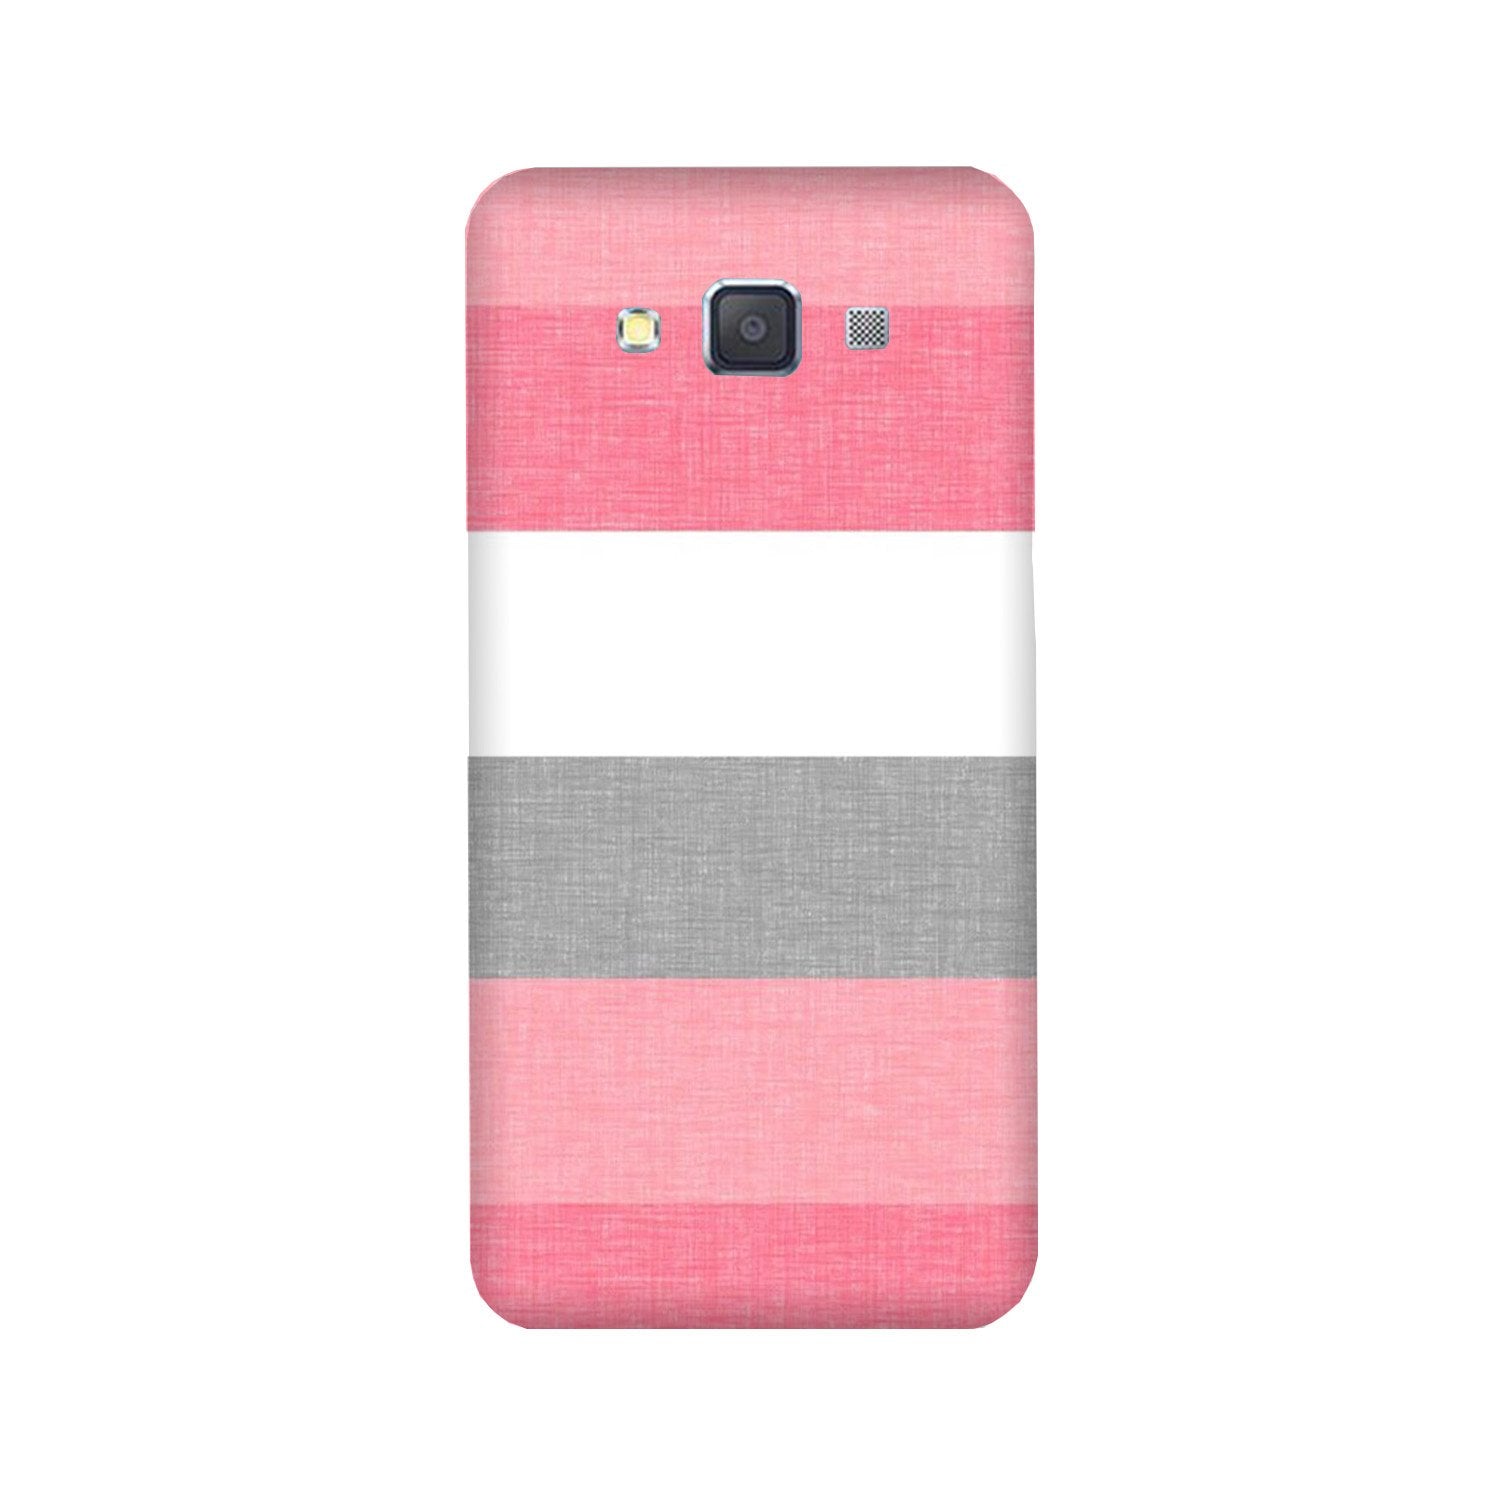 Pink white pattern Case for Galaxy J5 (2016)